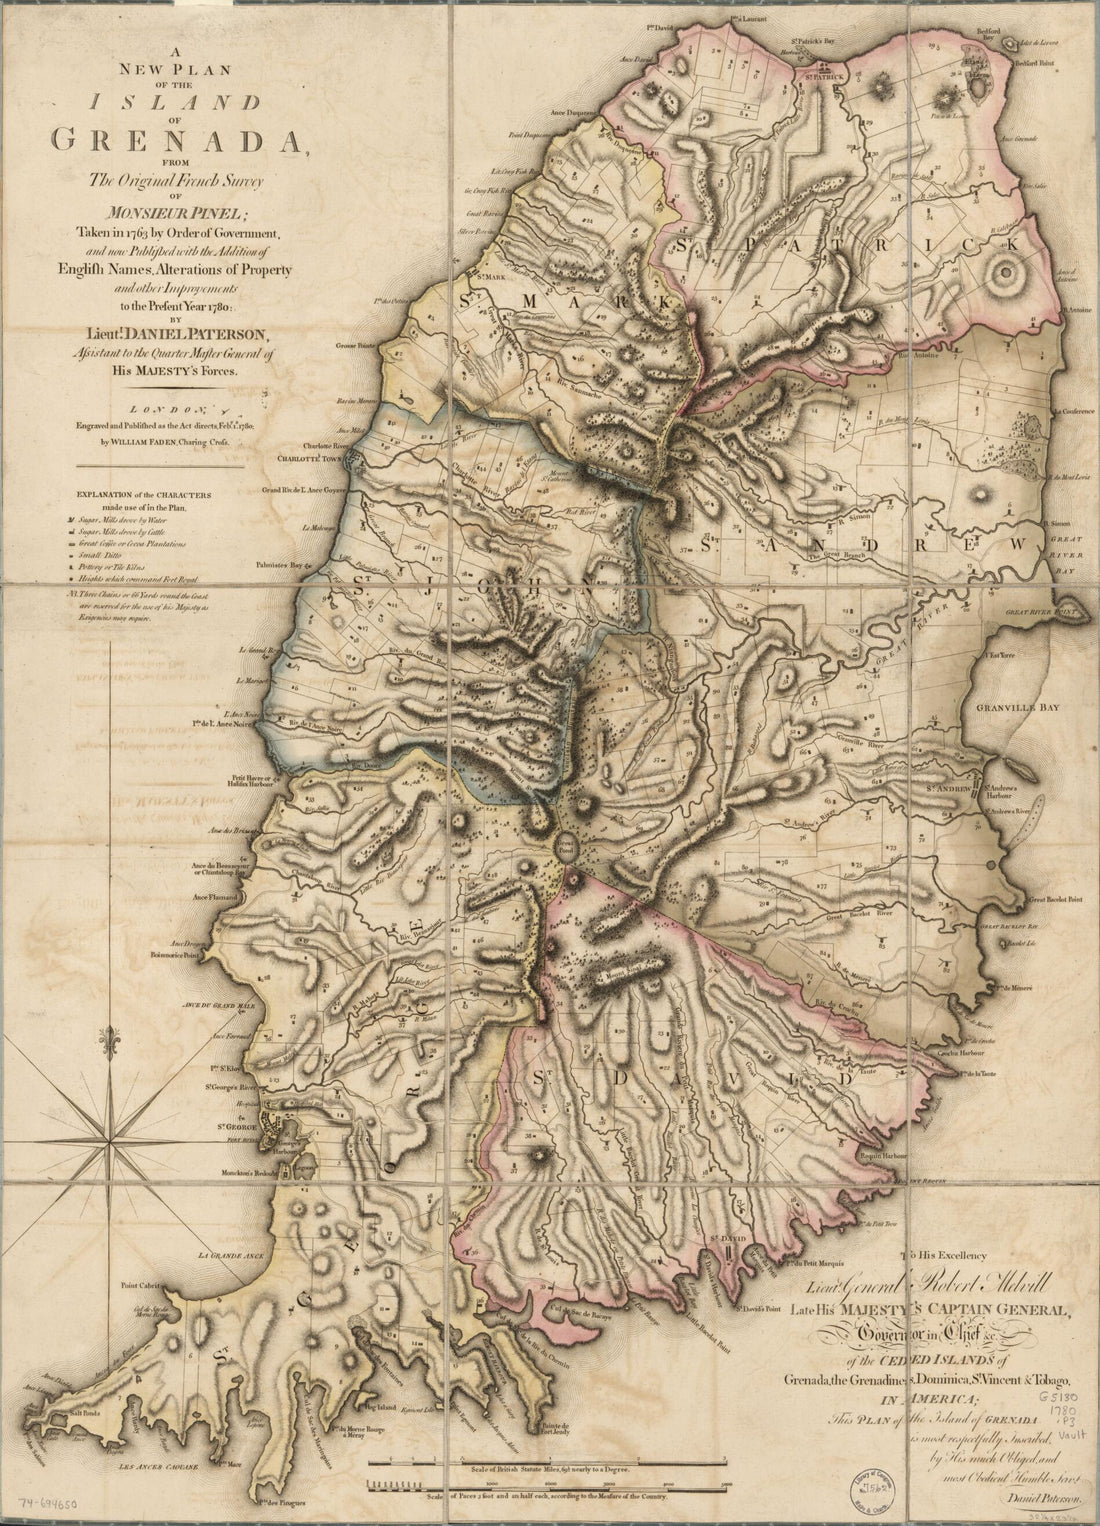 This old map of A New Plan of the Island of Grenada, from the Original French Survey of Monsieur Pinel; Taken In 1763 by Order of Government, and Now Published With the Addition of English Names, Alterations of Property, and Other Improvements to the Pre